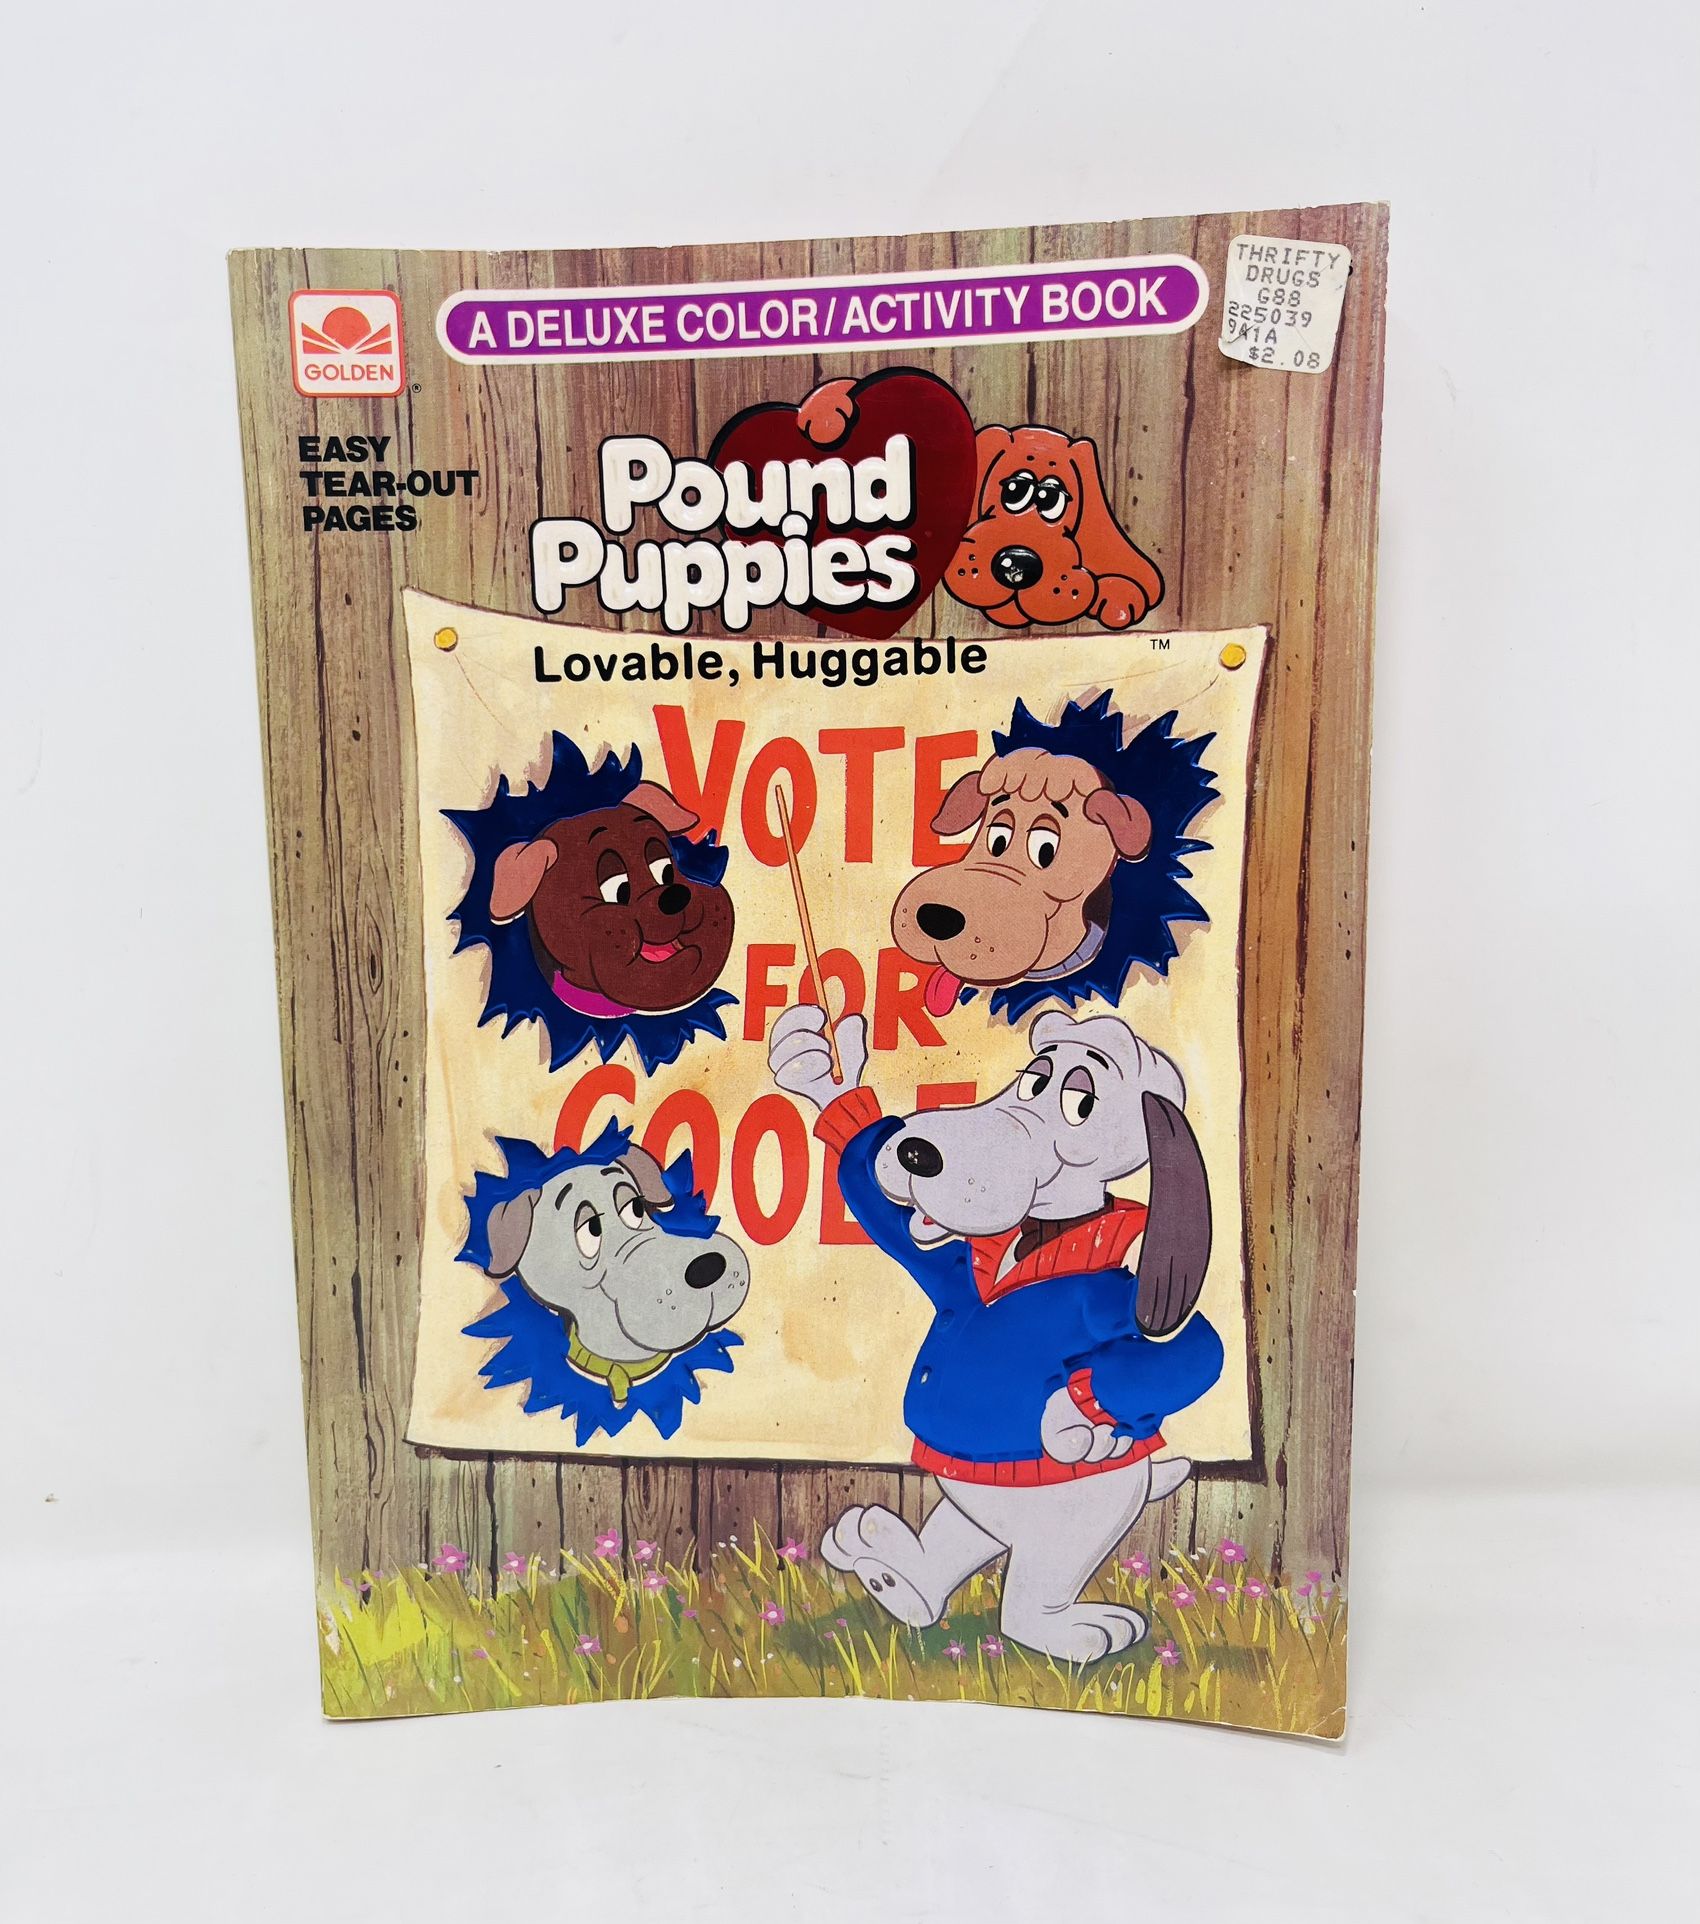 Vintage Pound Puppies  A Deluxe Color/Activity Book Golden Paperback 1986